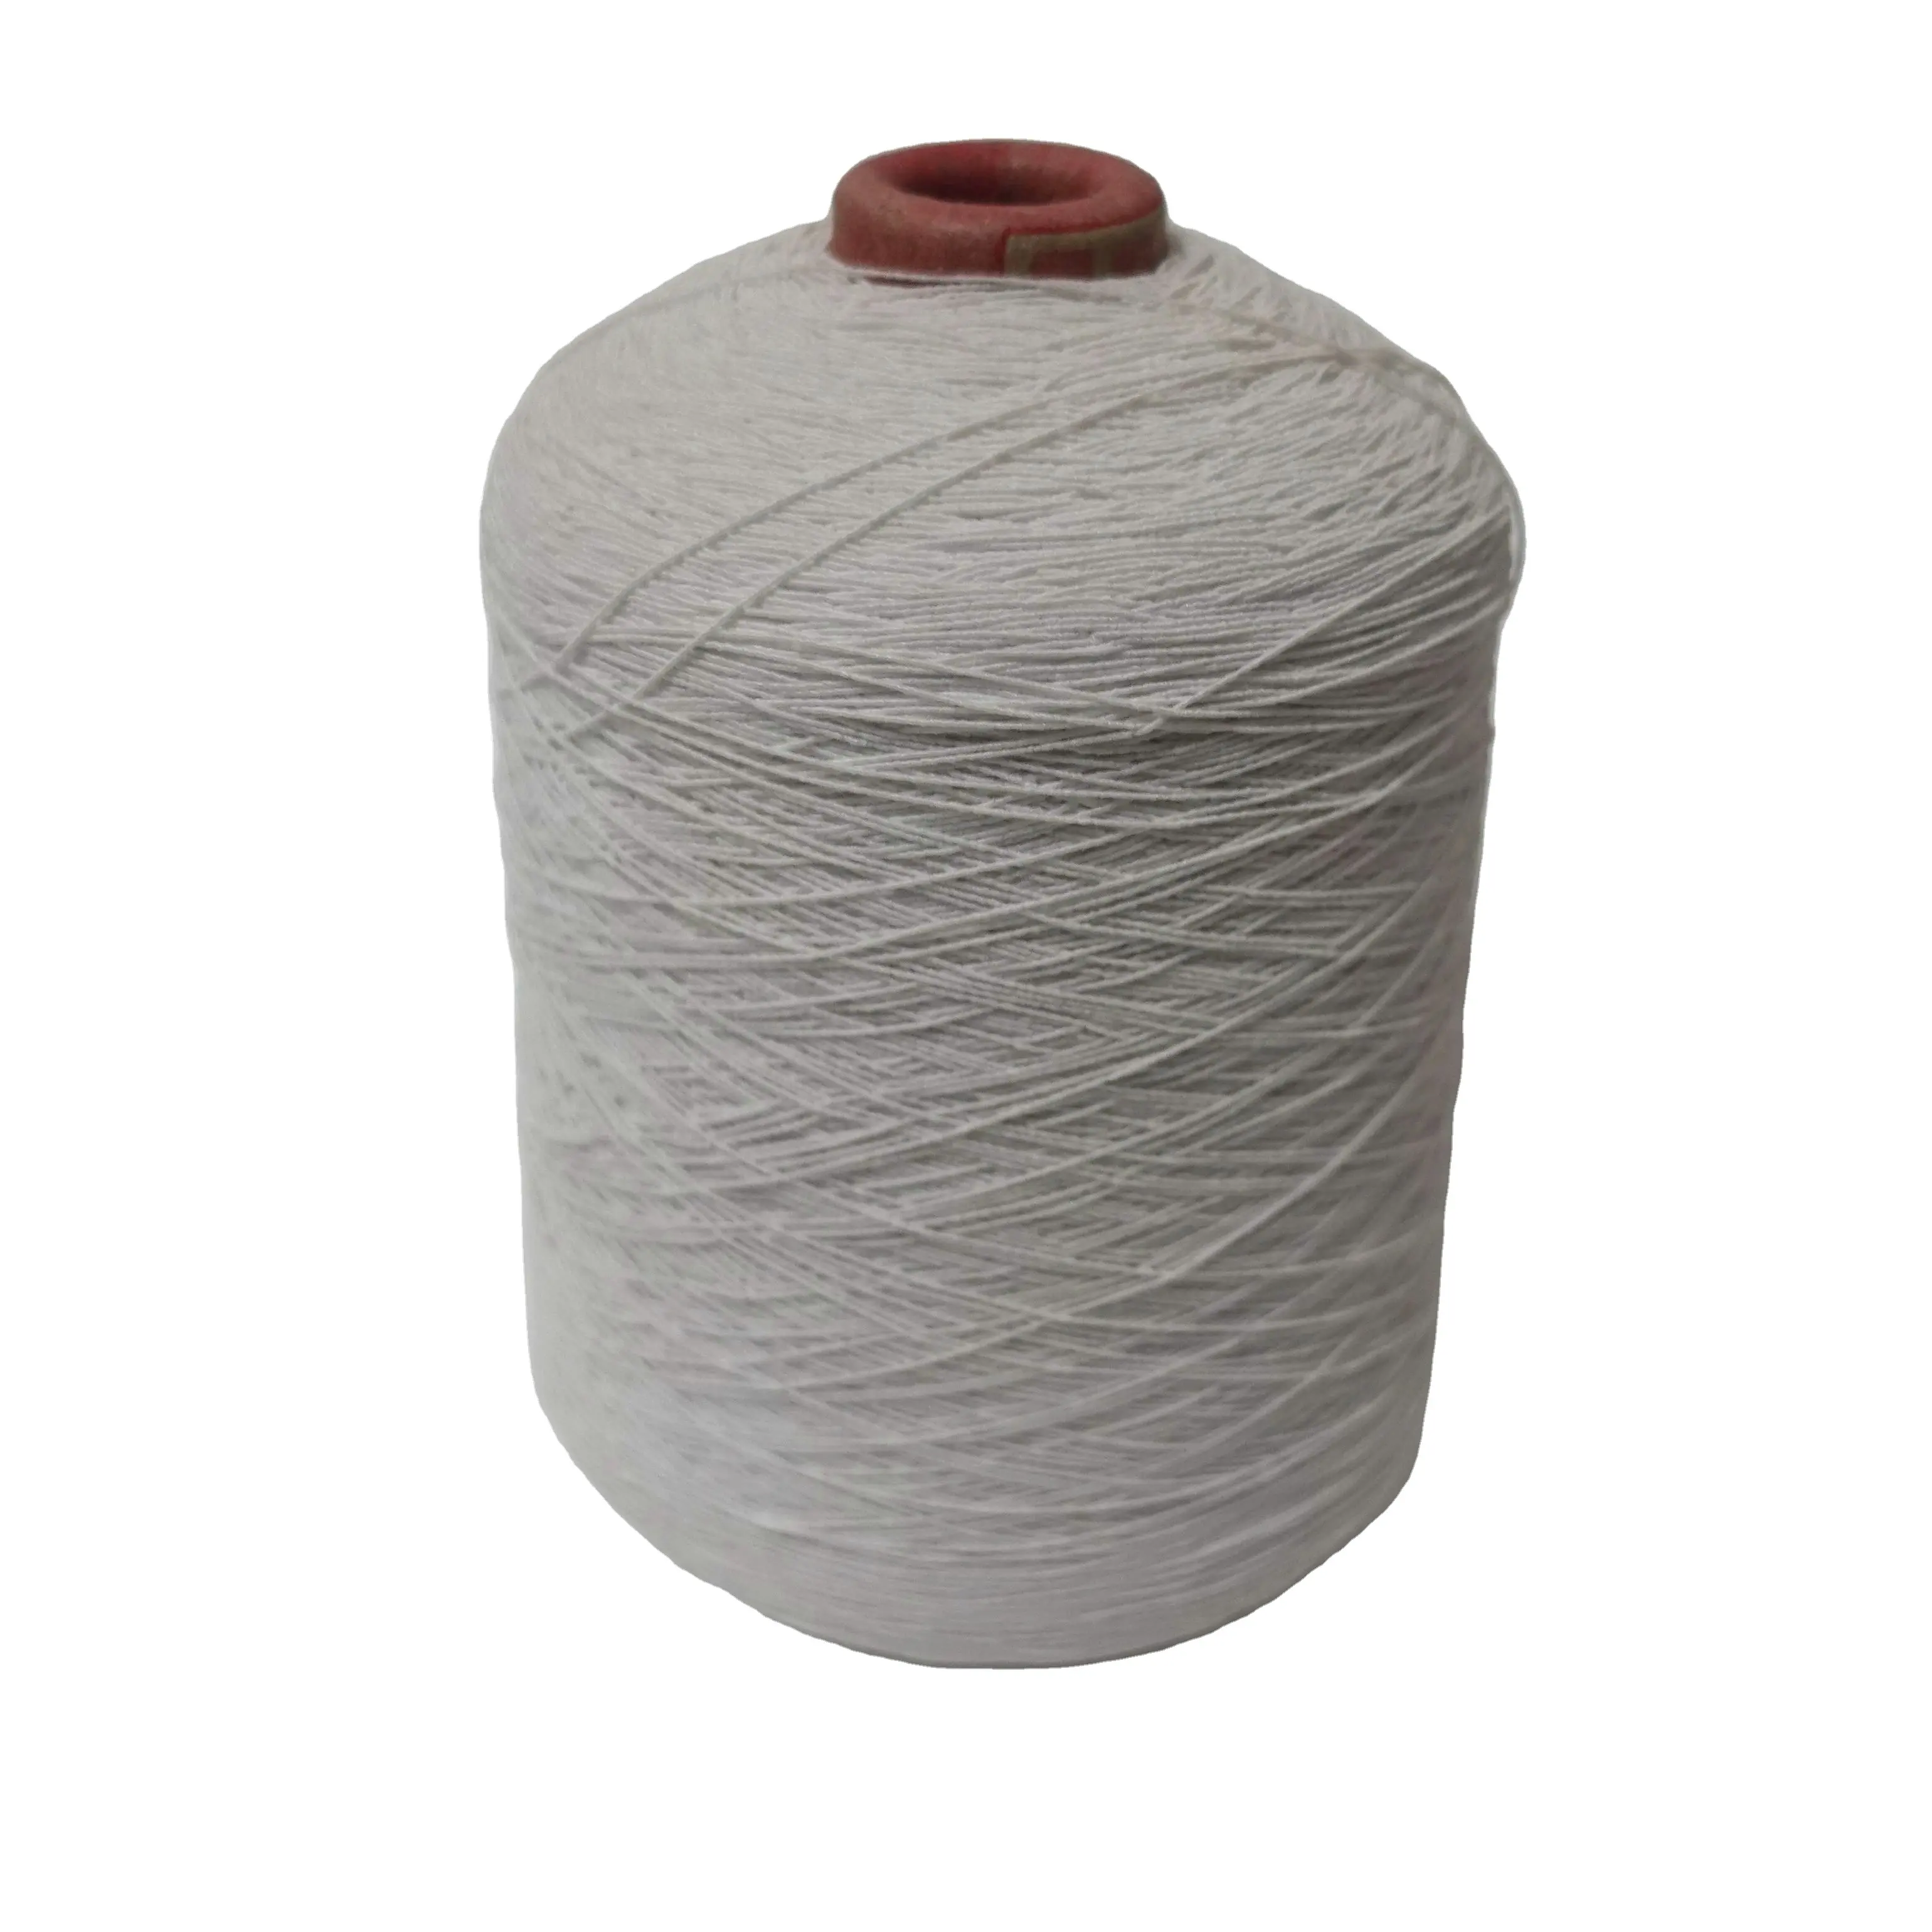 New Promotion Hot Style Elastic Rubber Thread Double Covered Yarn Standard Colorful Rubber Yarn